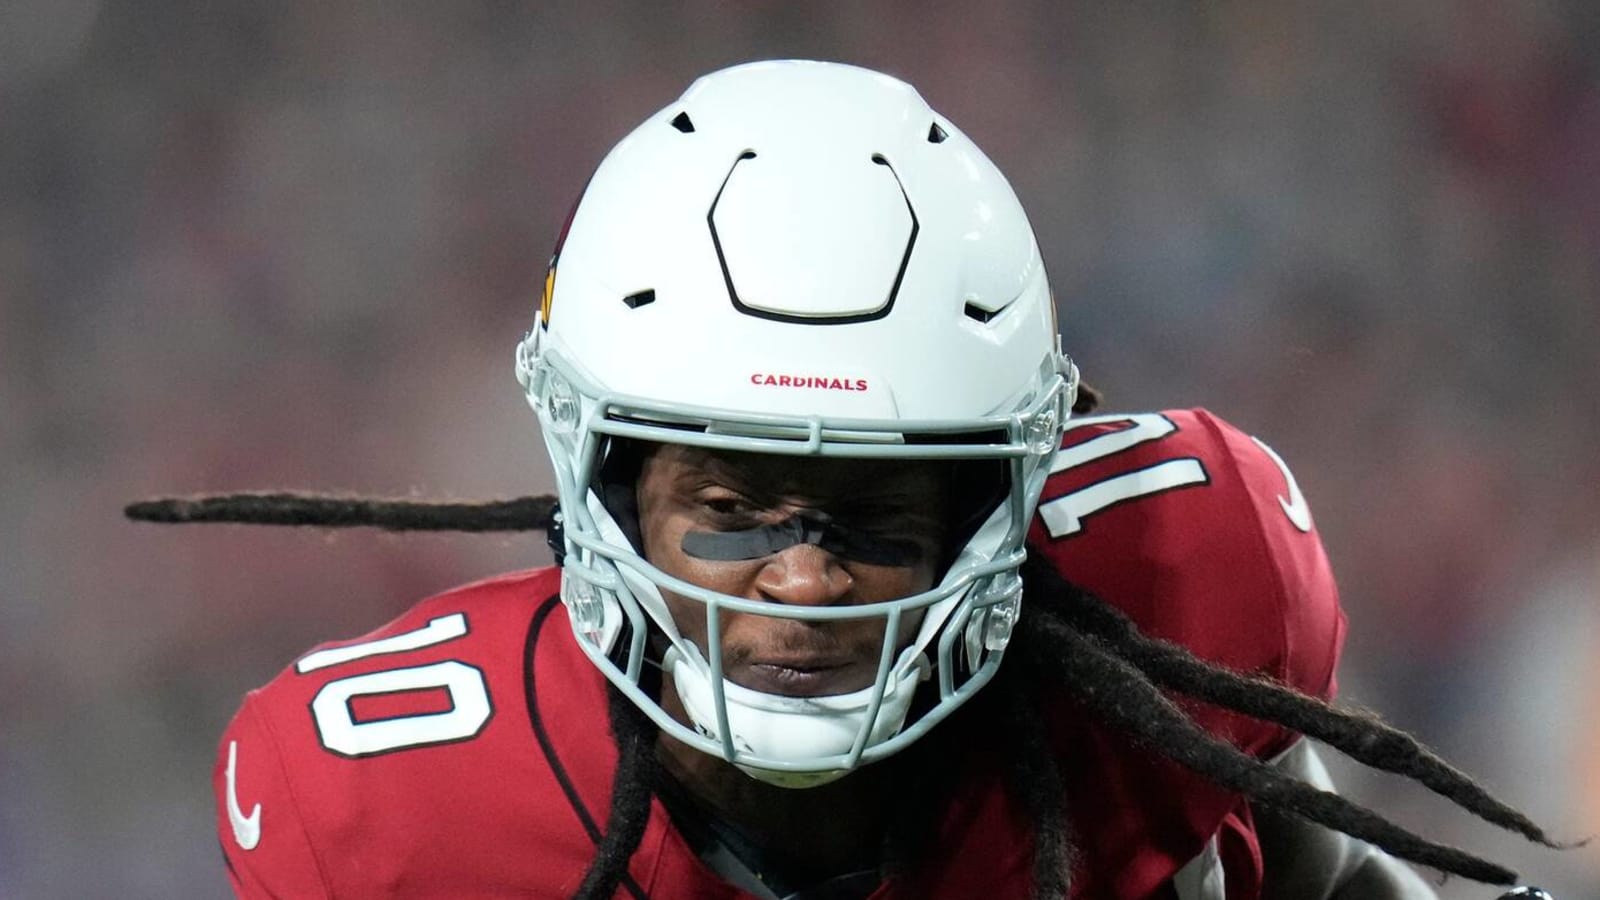 DeAndre Hopkins hints at playing for this NFC team